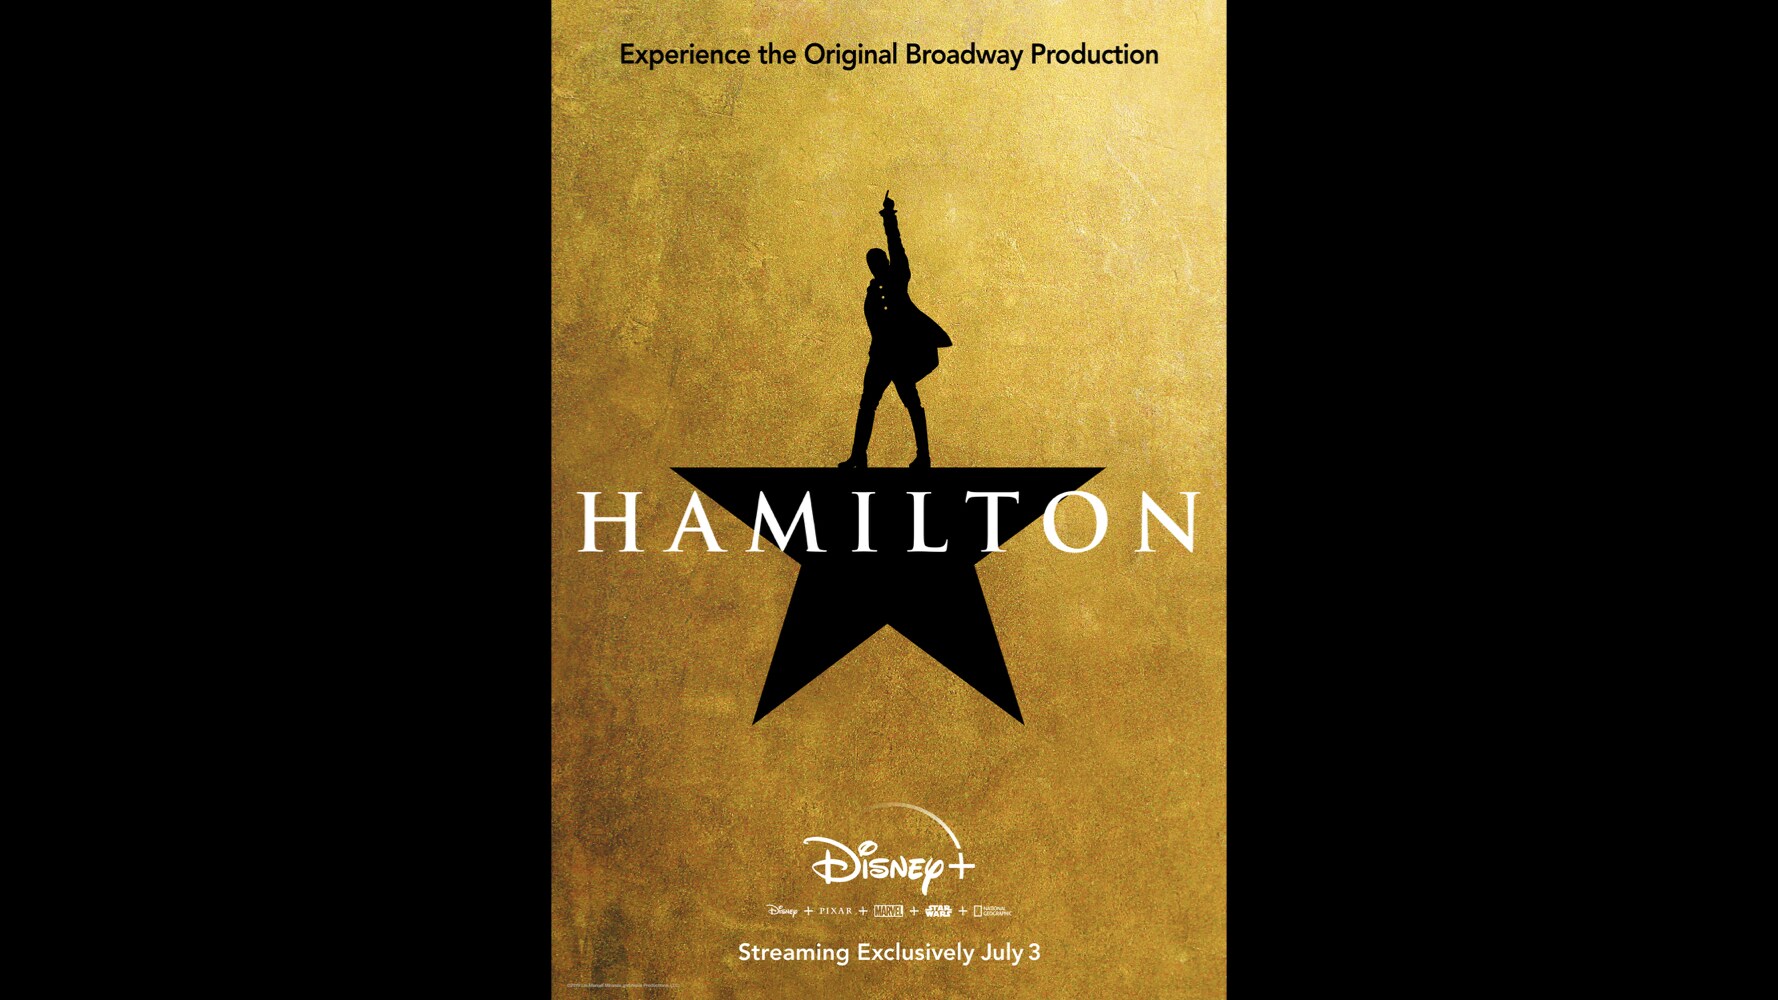 The Walt Disney Company To Fast Track Premiere Of The Tony Award®- And Pulitzer Prize-Winning Musical “Hamilton”  The Film Of The Original Broadway Production To Stream Directly In Homes Worldwide Exclusively On Disney+ Beginning July 3, 2020